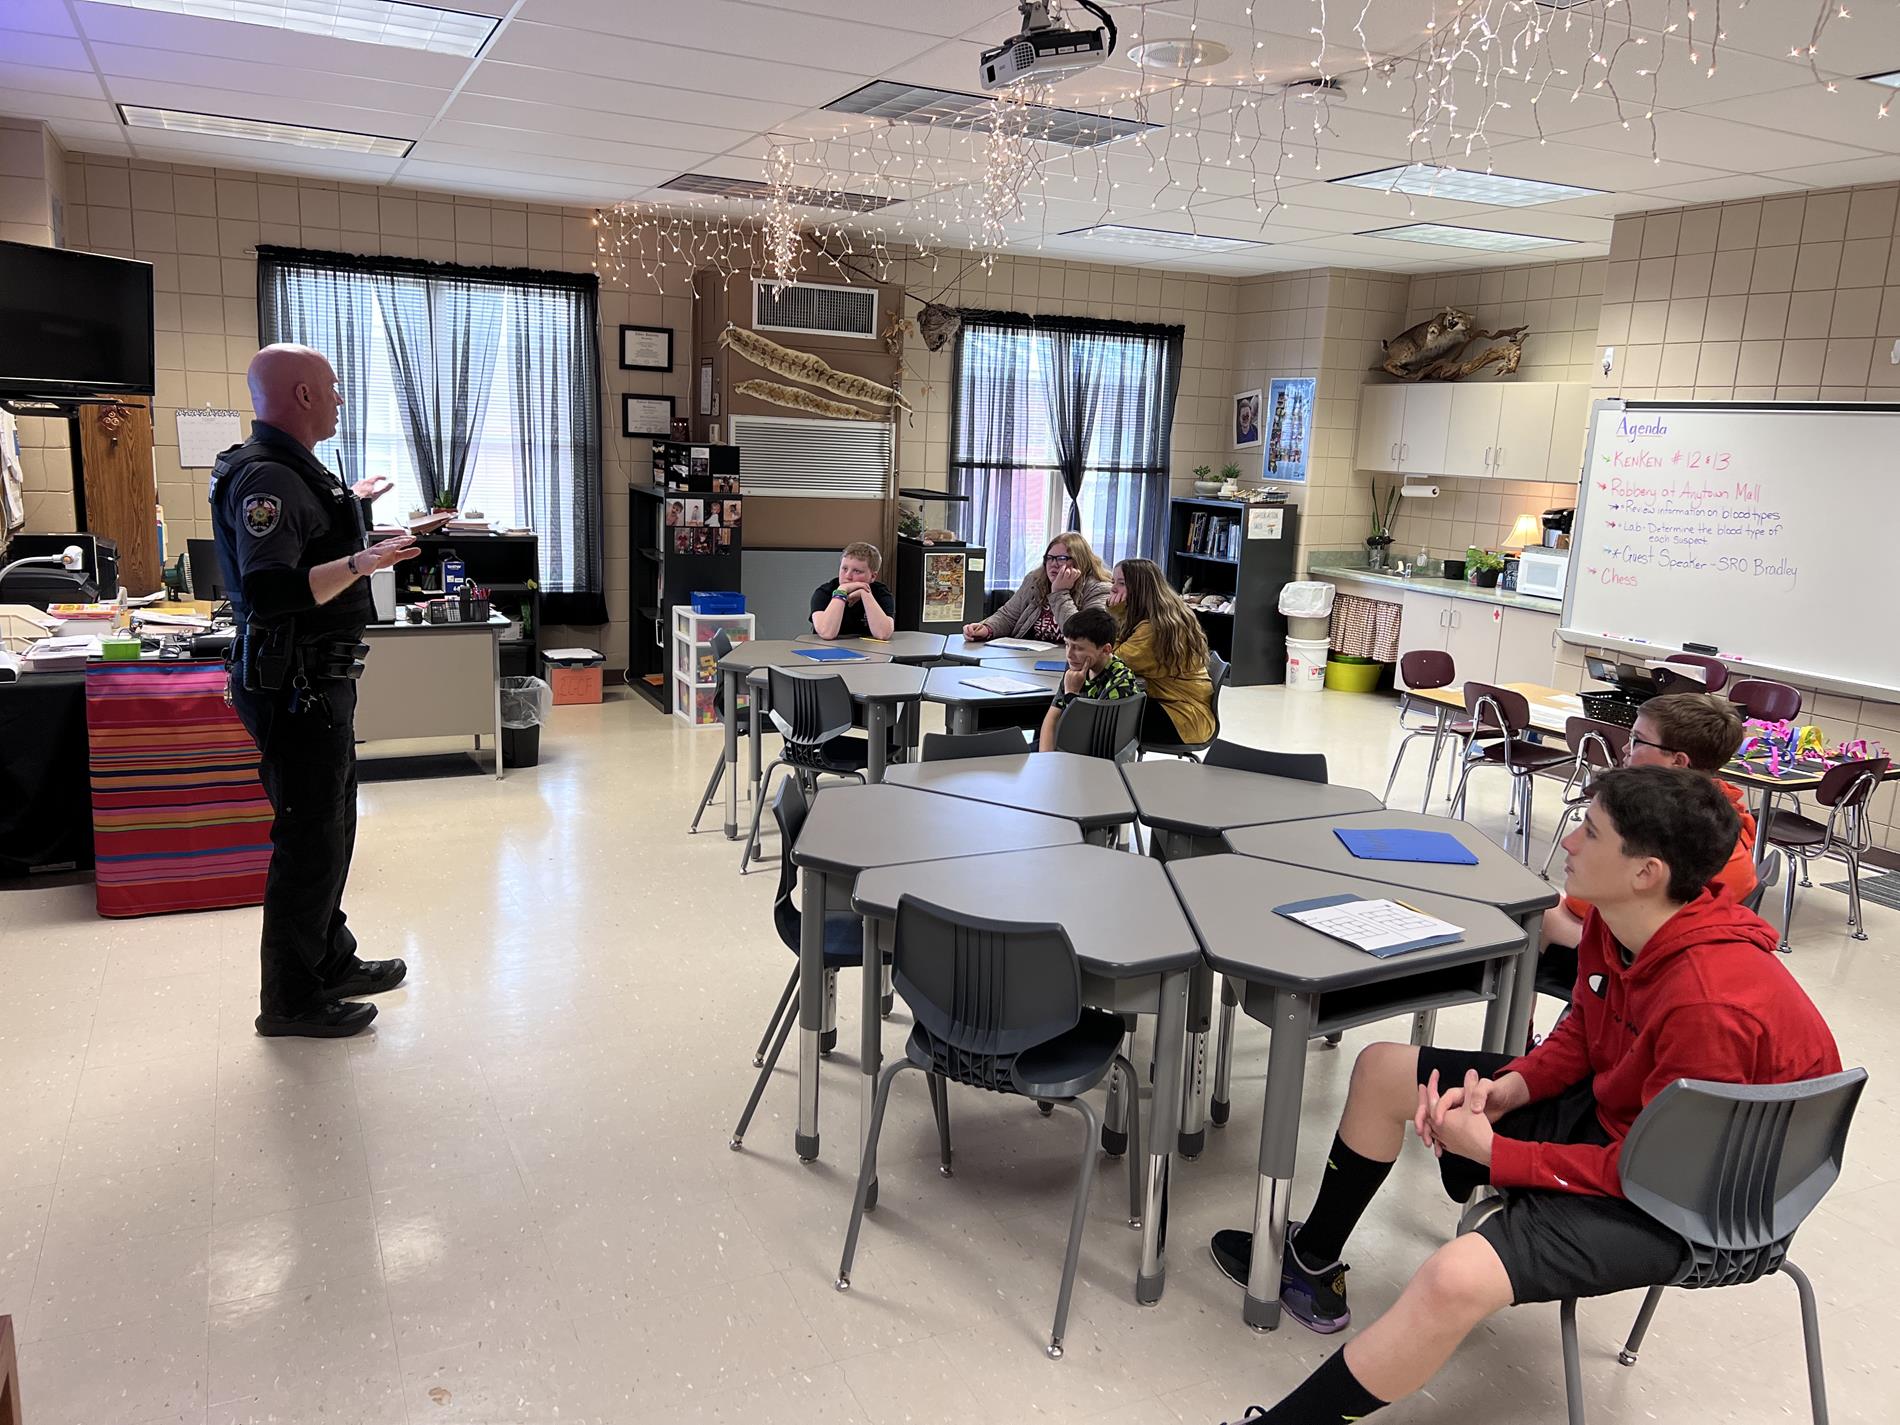 Officer Bradley spoke to the students about crime scene investigation.